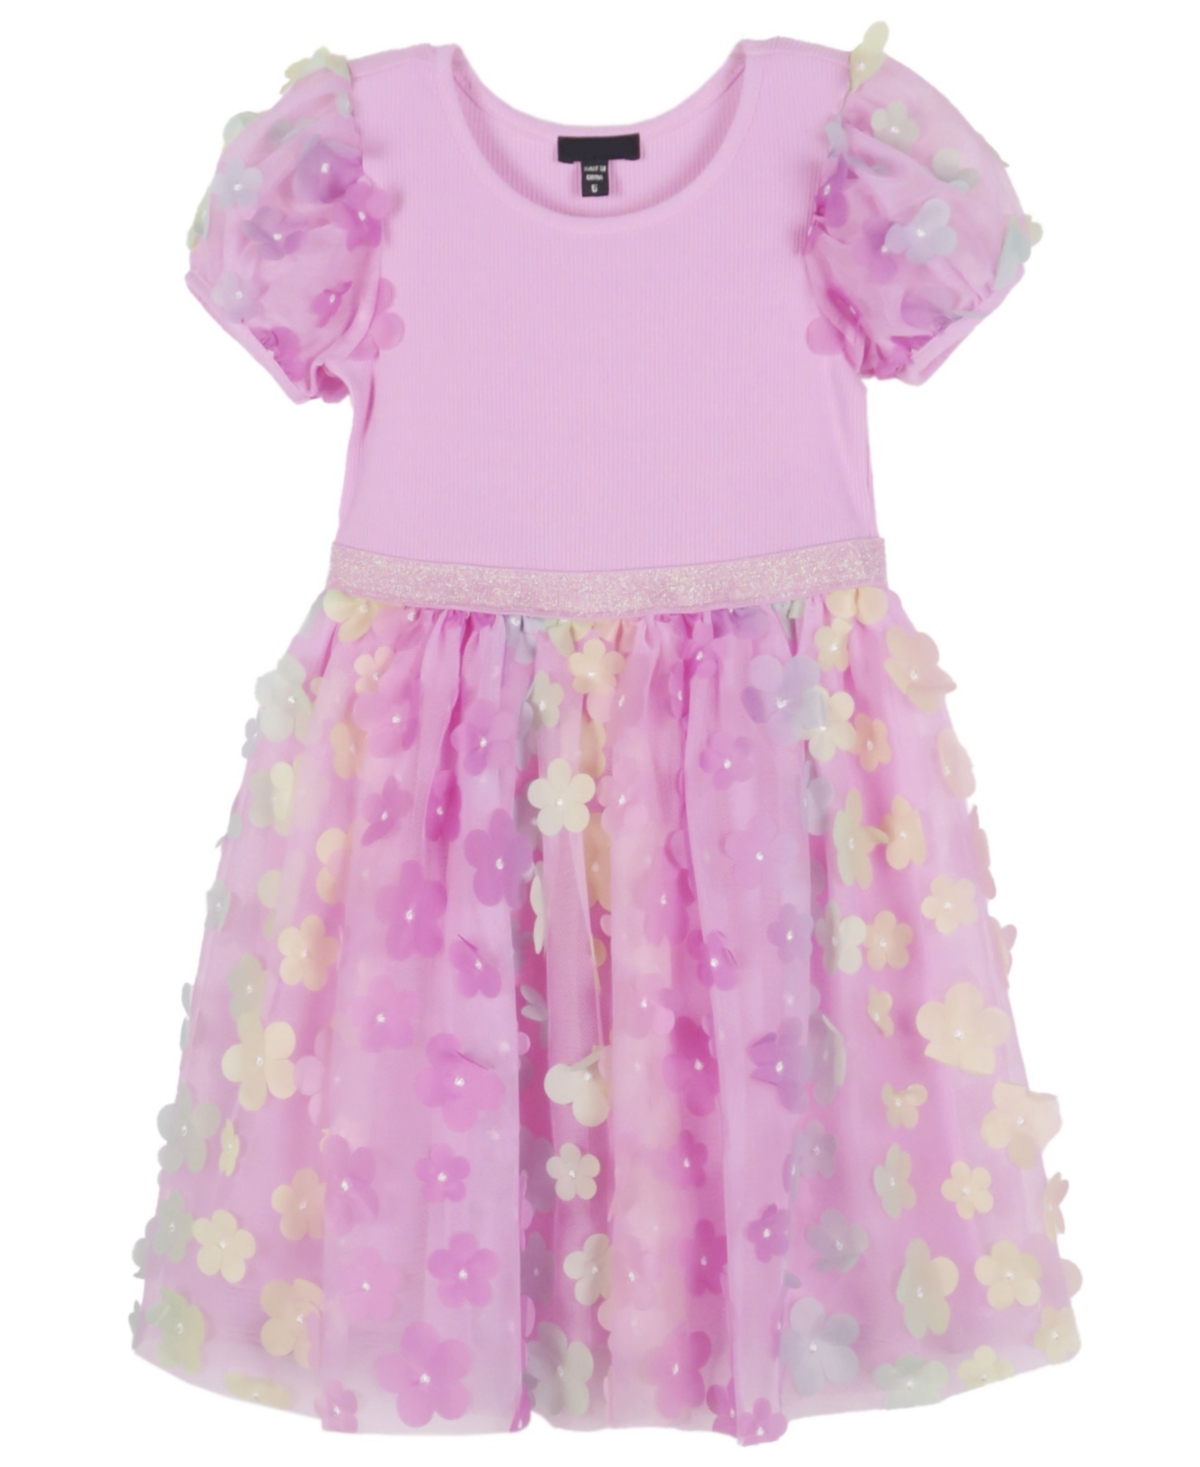 PINK & VIOLET TODDLER GIRLS SOLID RIB BODICE WITH 3D FLOWER SKIRT AND PUFF SLEEVES DRESS